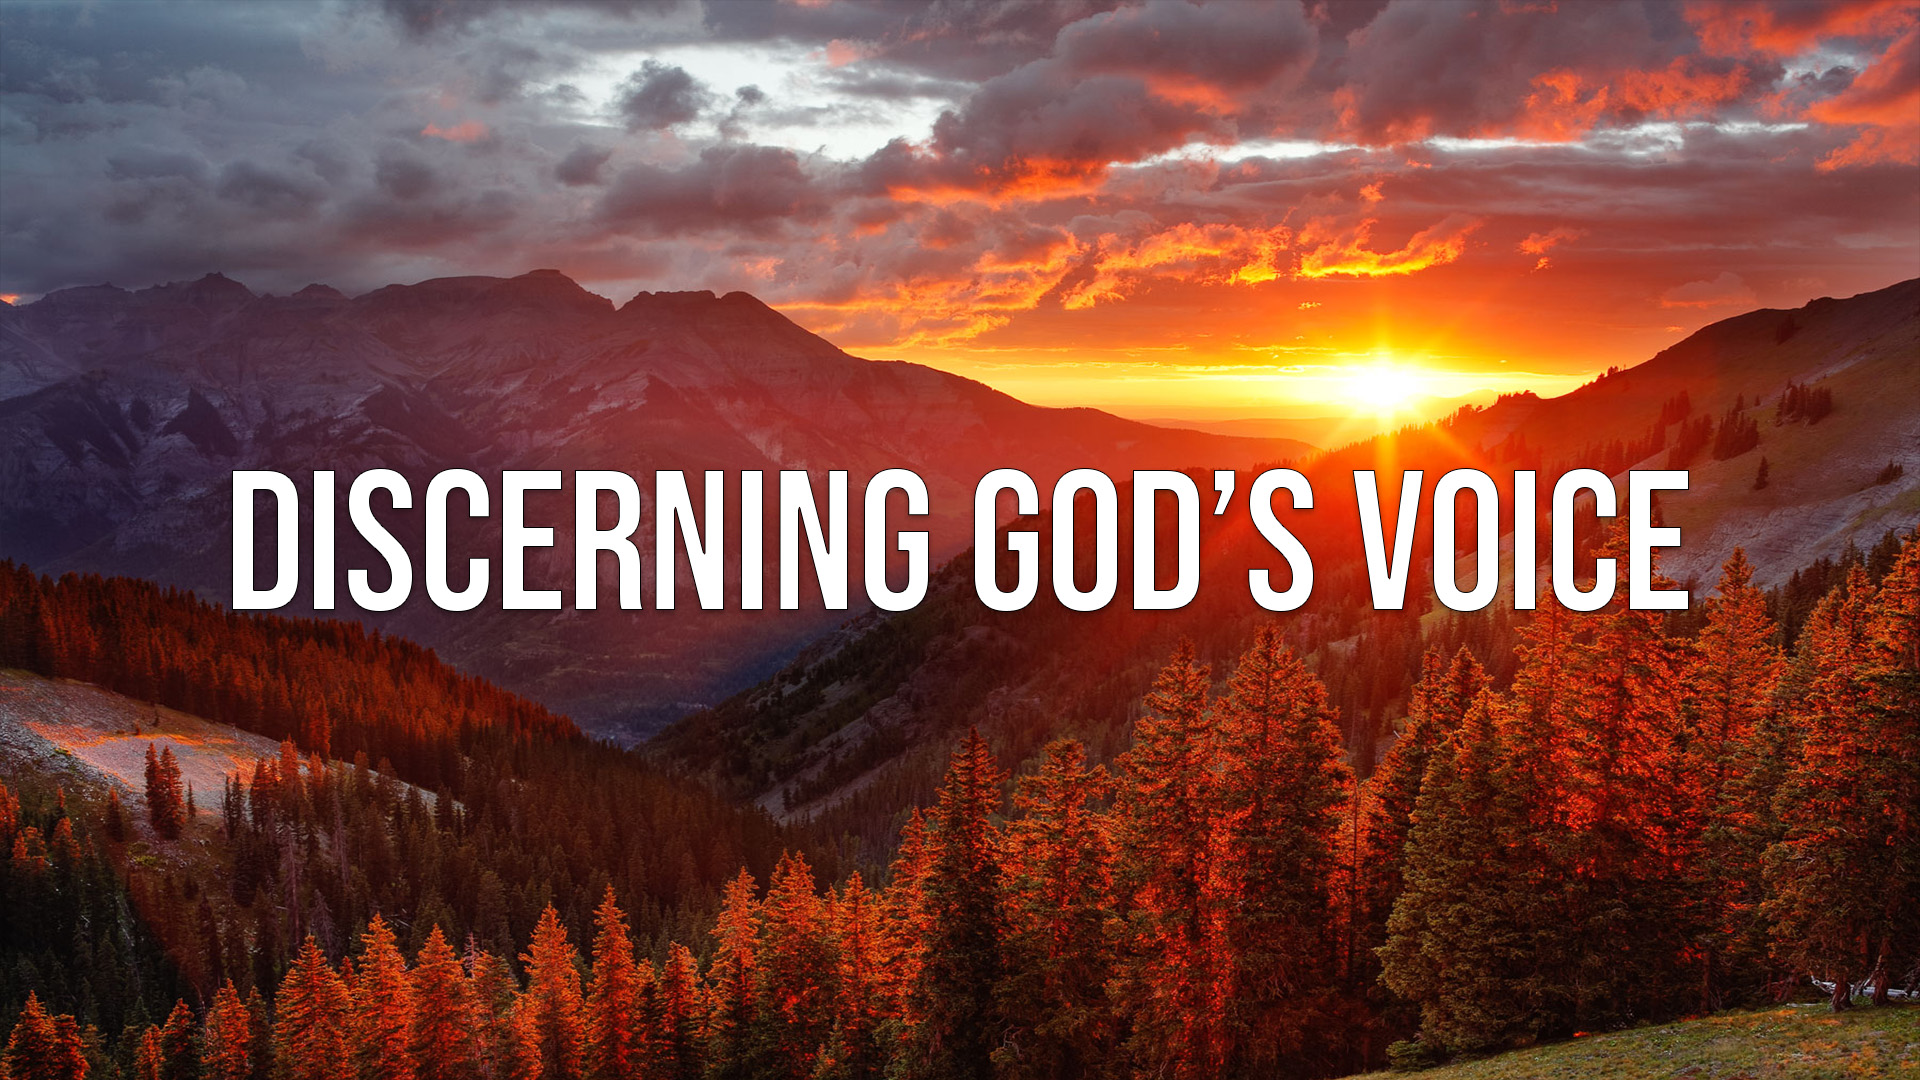 Discerning the Voice of God - How He Speaks -  The Holy Spirit